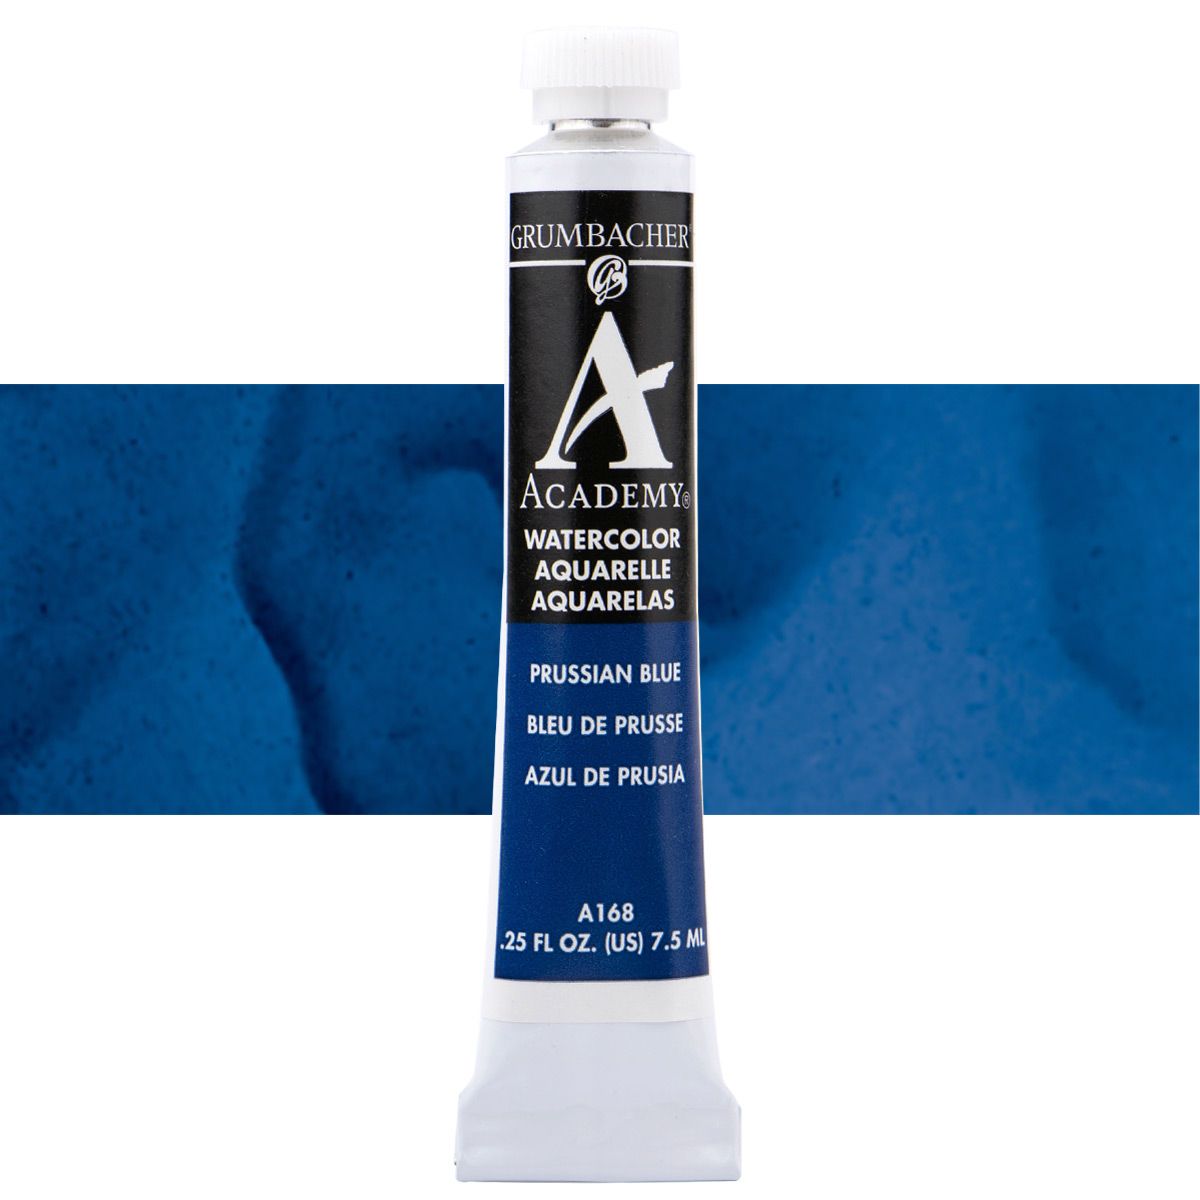 Grumbacher Academy Watercolor, Prussian Blue - 7.5 ml Tube